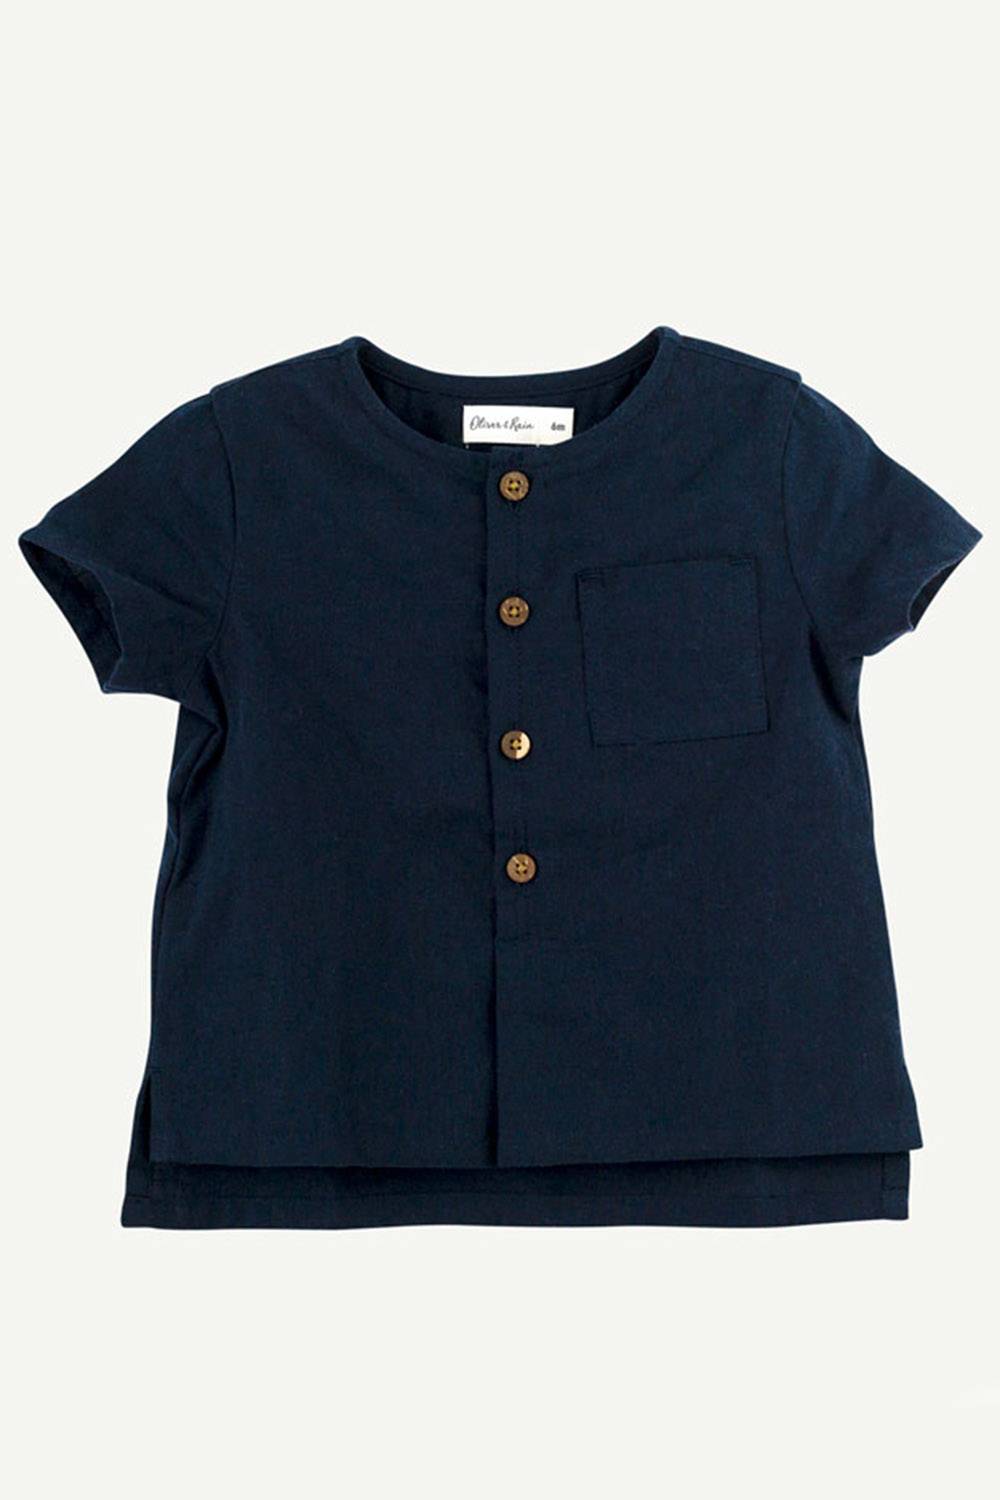 8 Best Affordable Linen Baby Boy And Girl Clothes | Panaprium